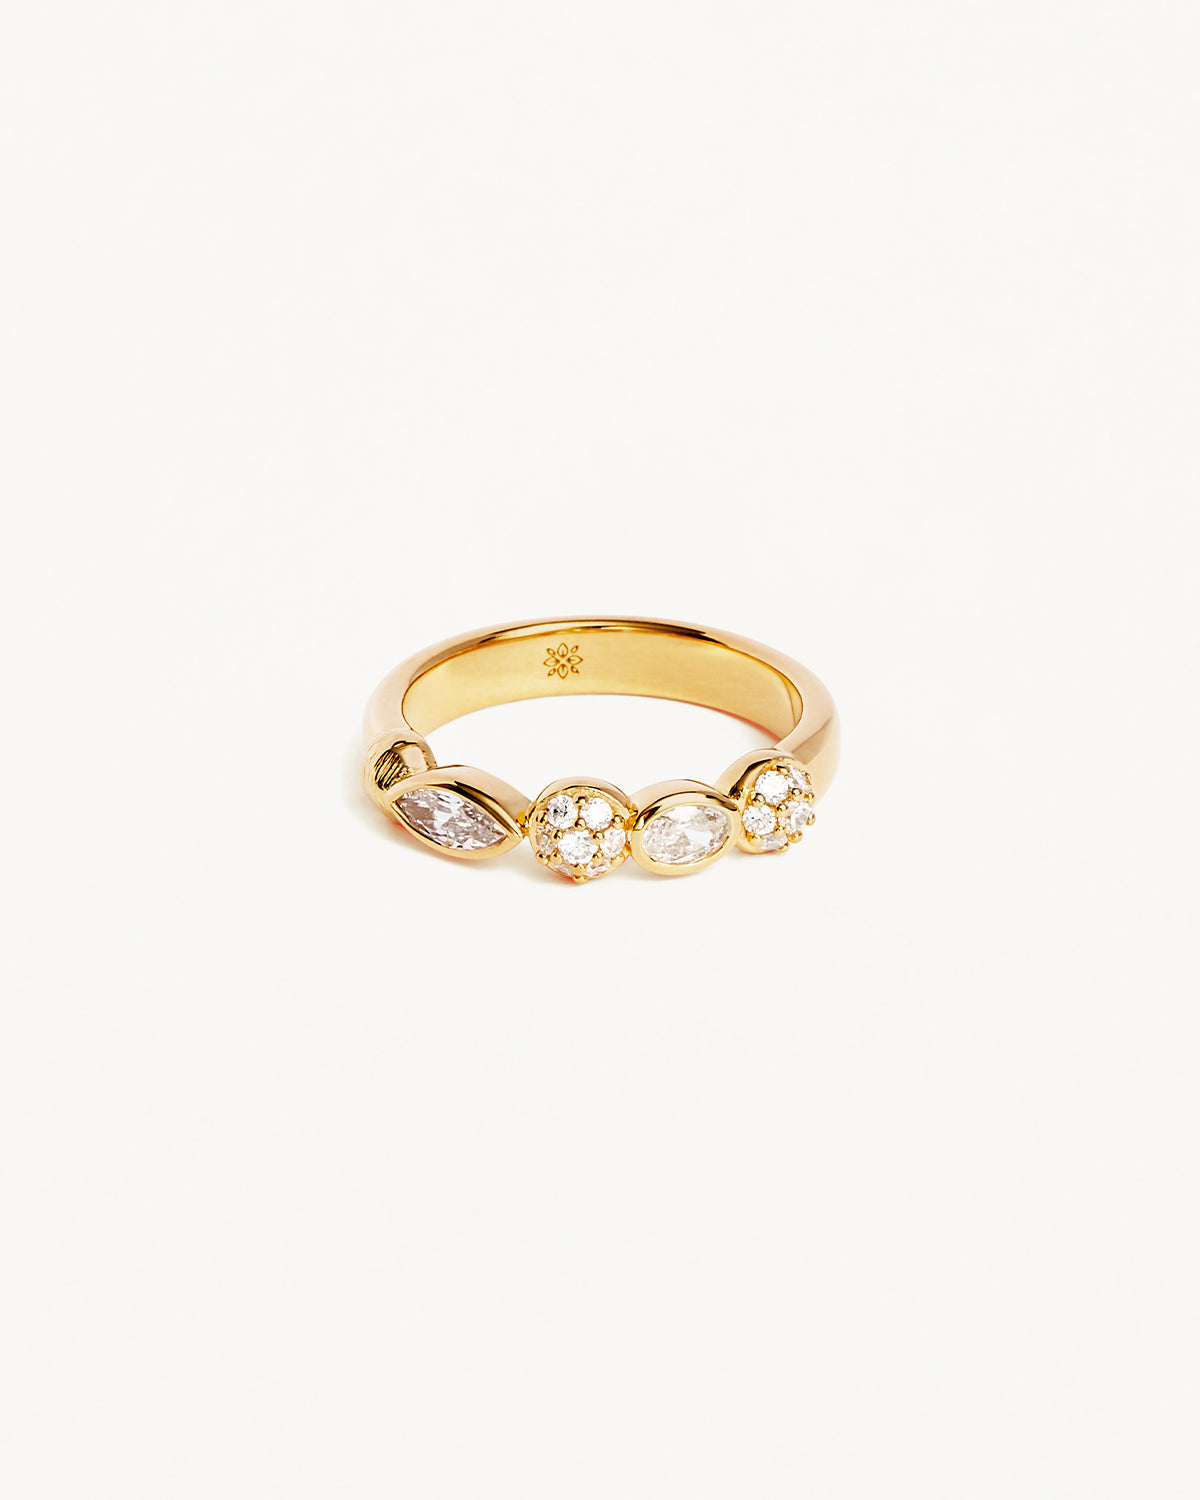 By Charlotte Magic of Eye Crystal Ring, Gold or Silver